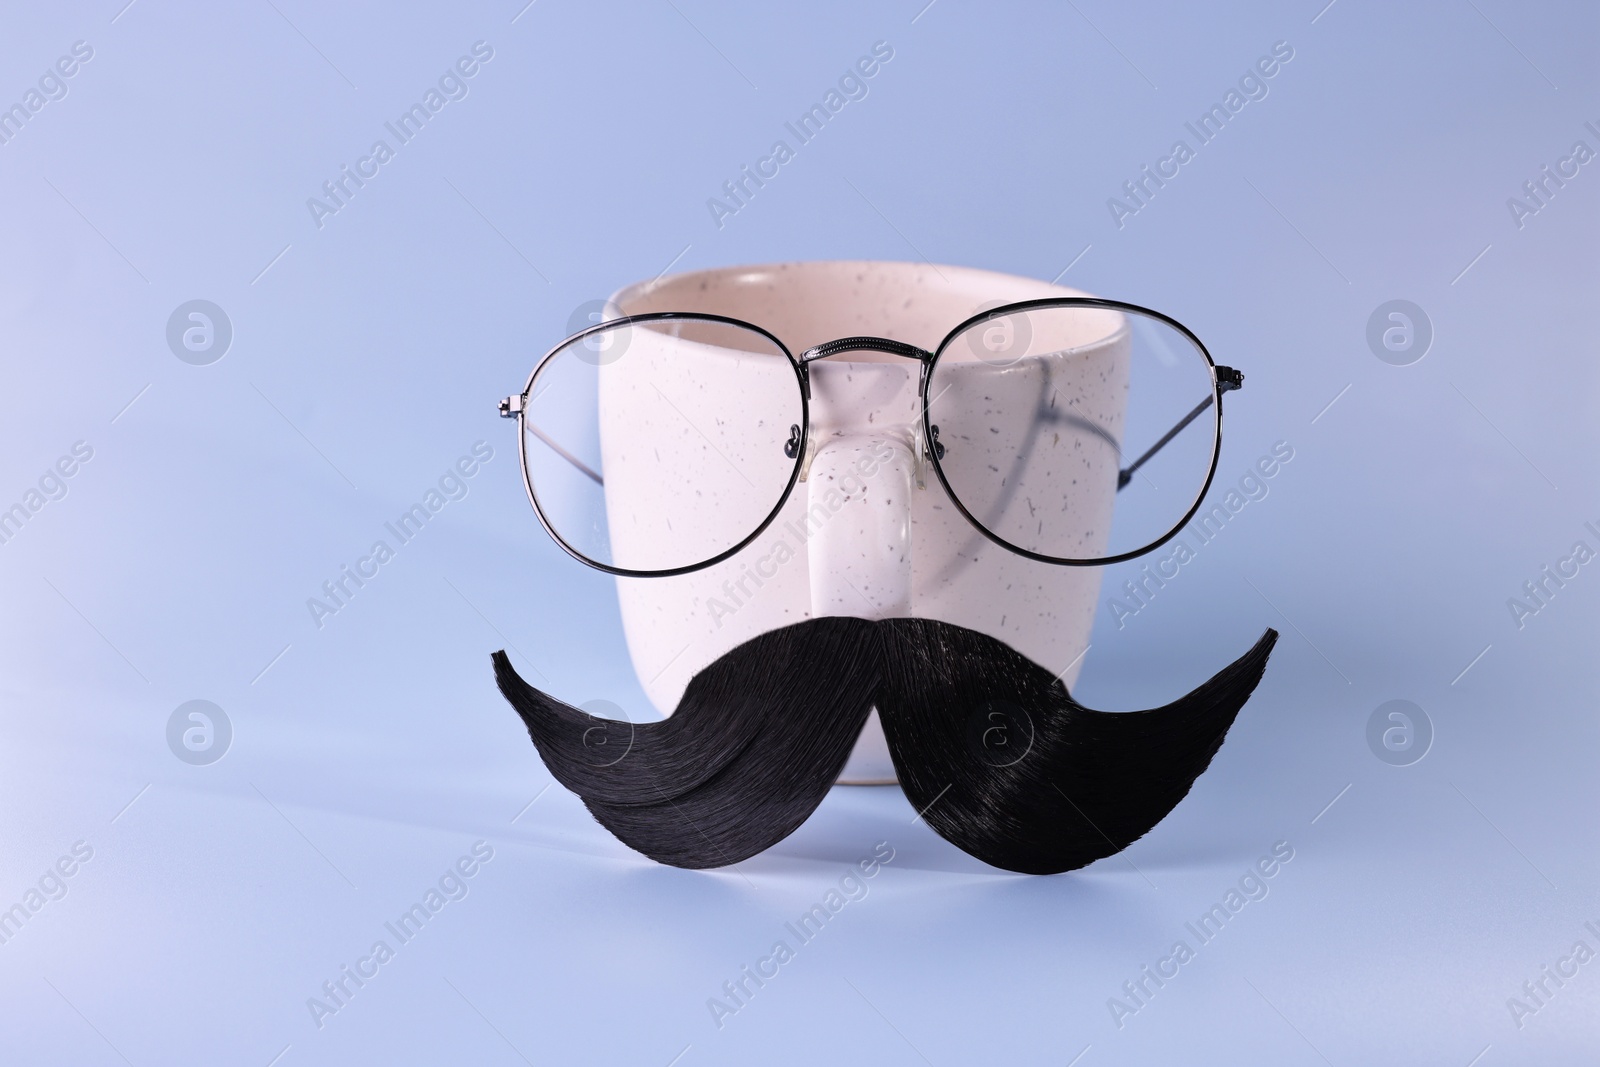 Photo of Man's face made of artificial mustache, glasses and cup on light blue background